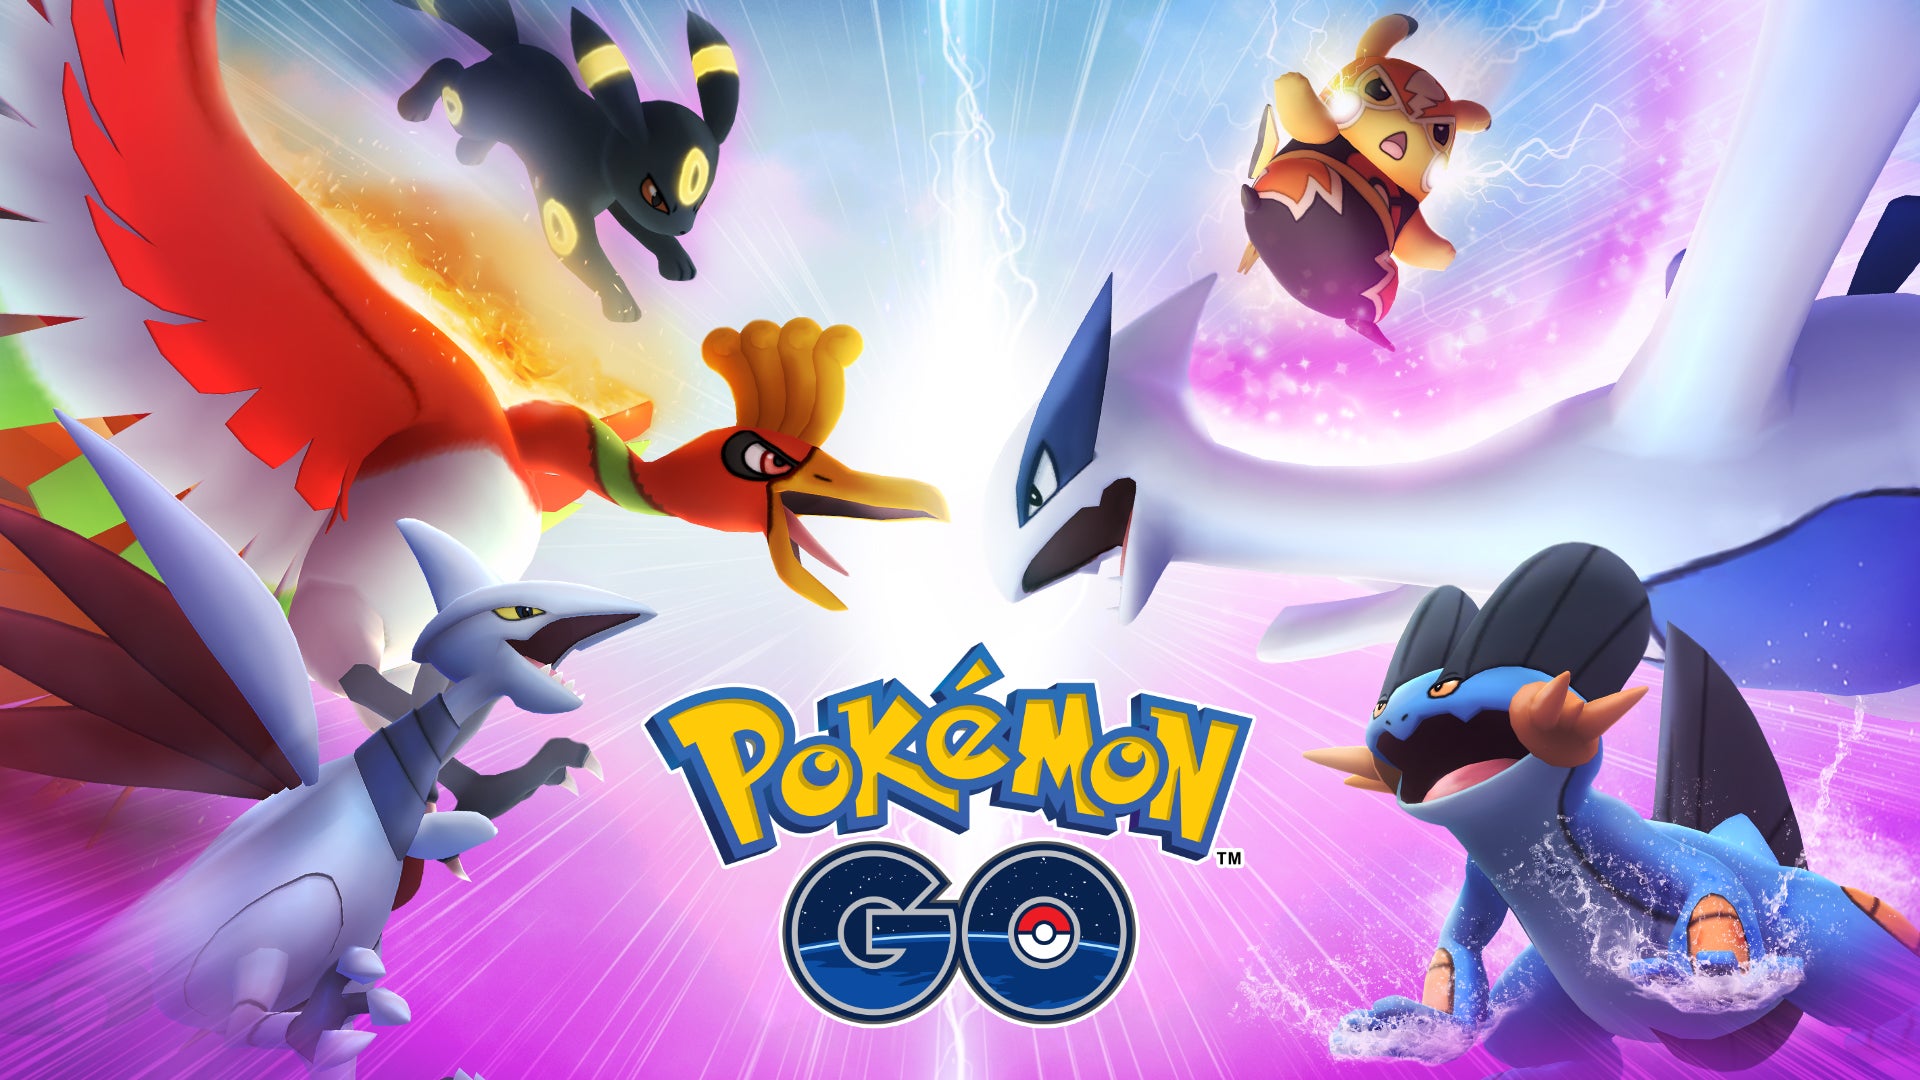 Image for Pokemon Go May update to feature 5 new shiny Pokemon